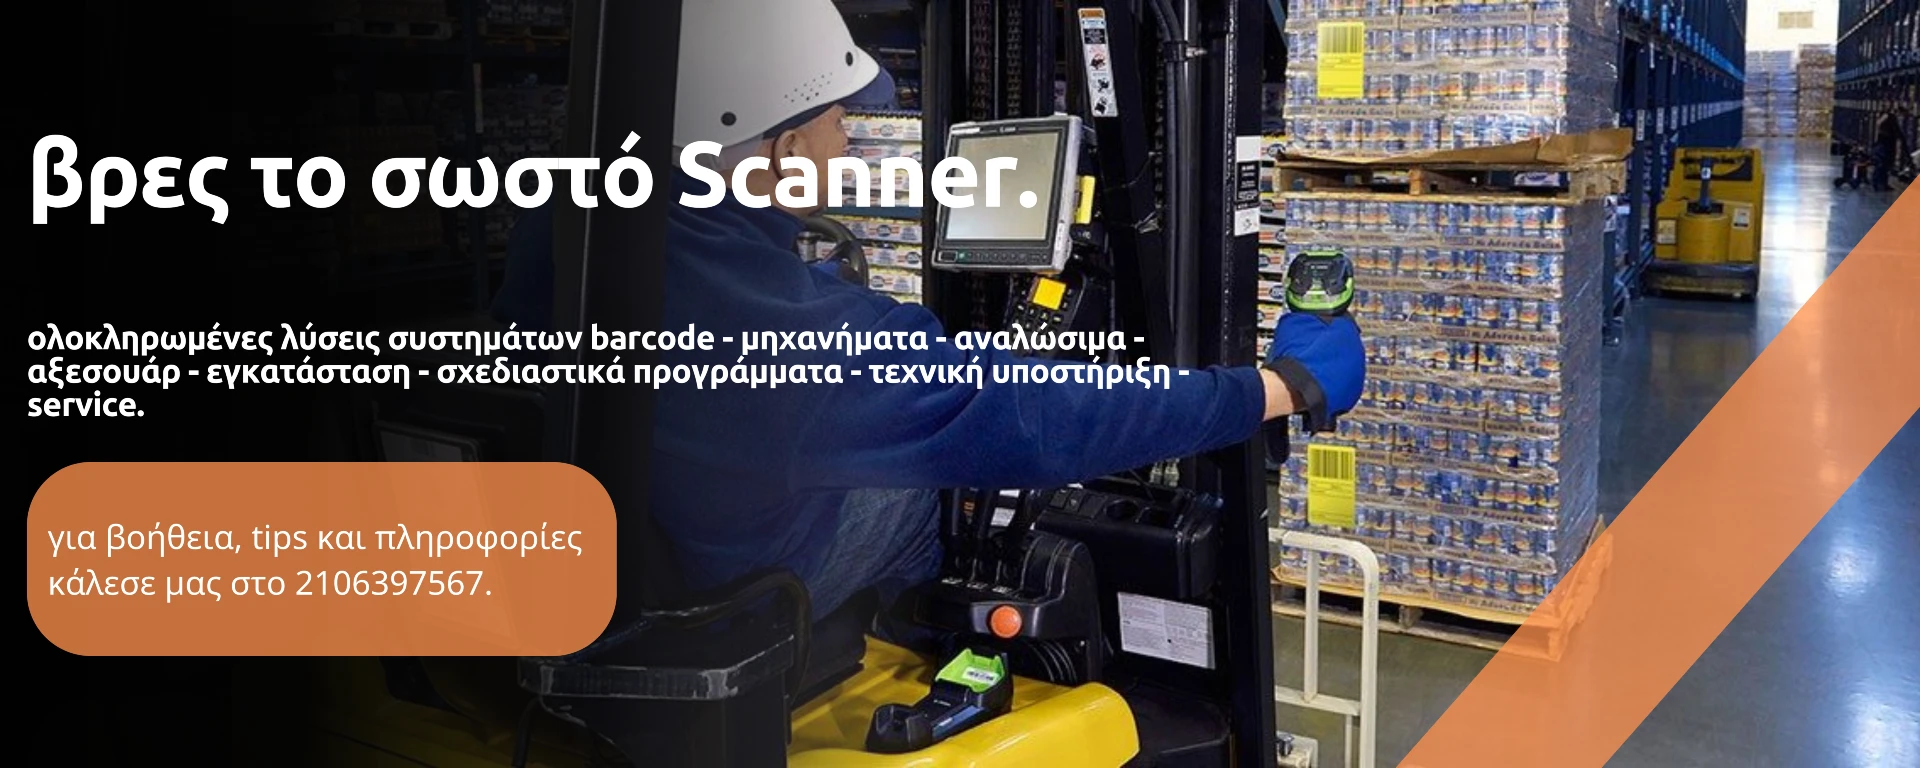 barcode_scanners_product_category_blp_connexion